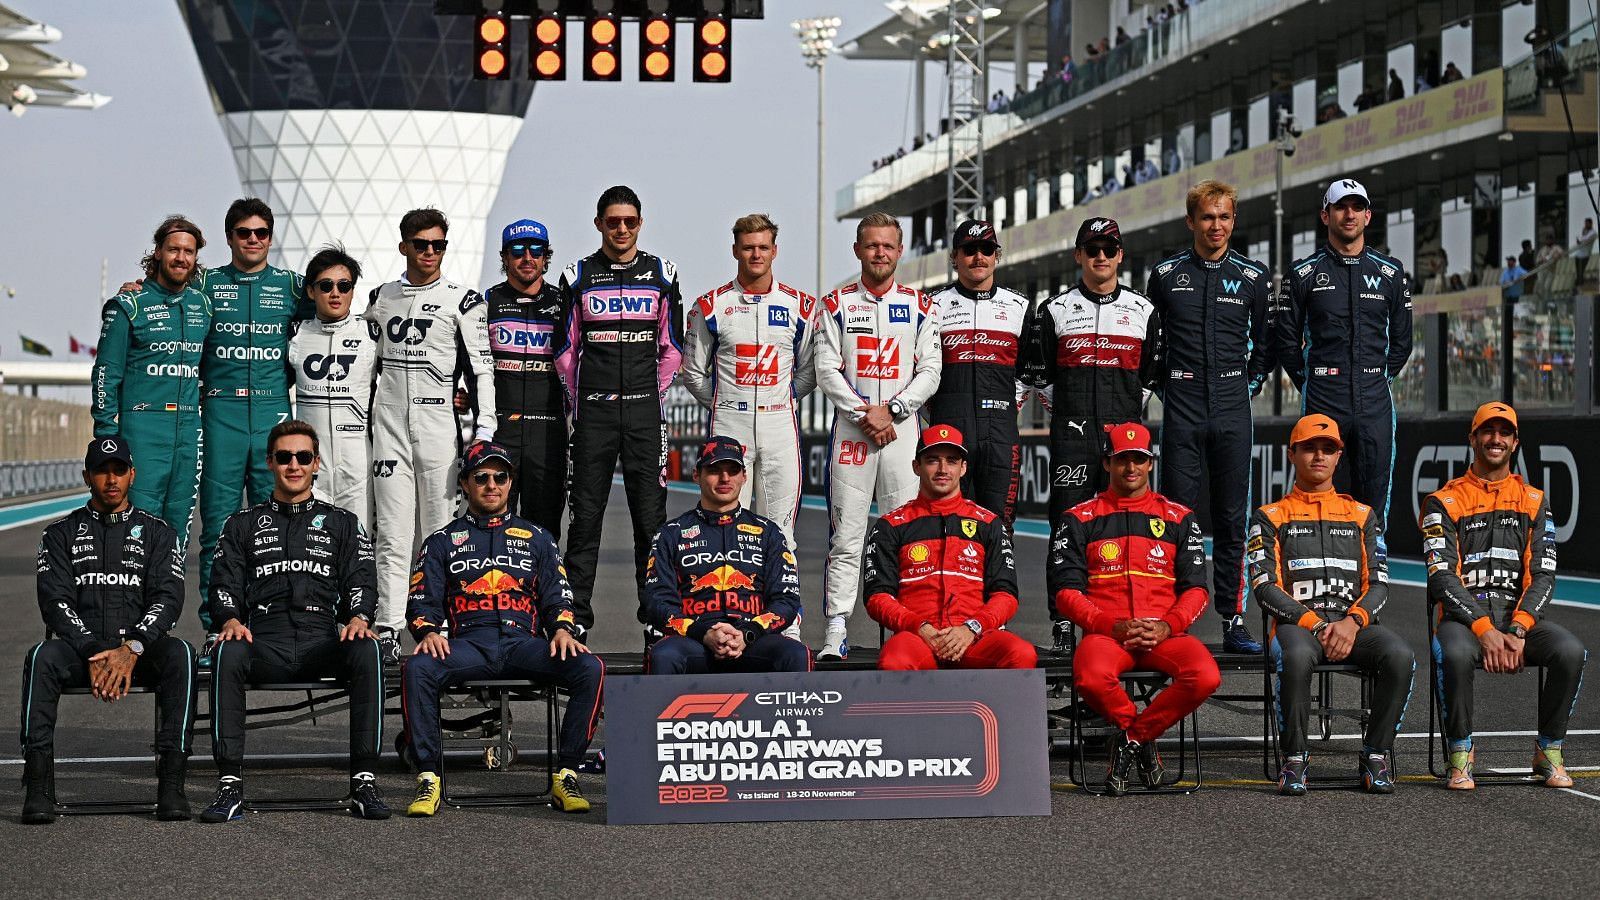 Who should not be on the F1 grid?